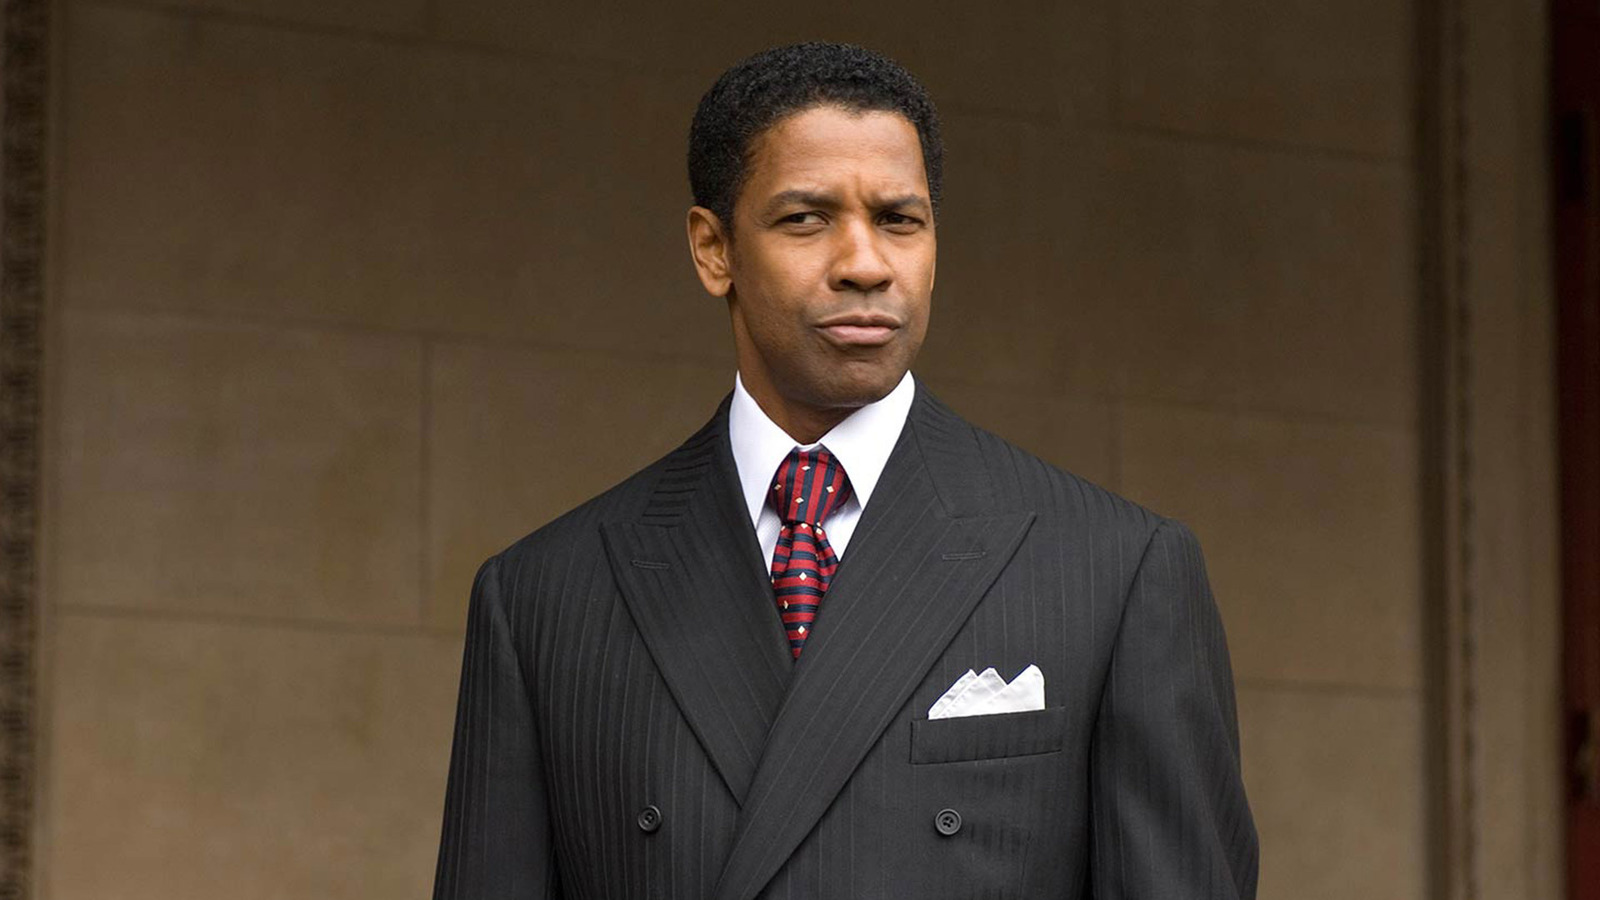 The Two Denzel Washington Movies Dominating Netflix Right Now